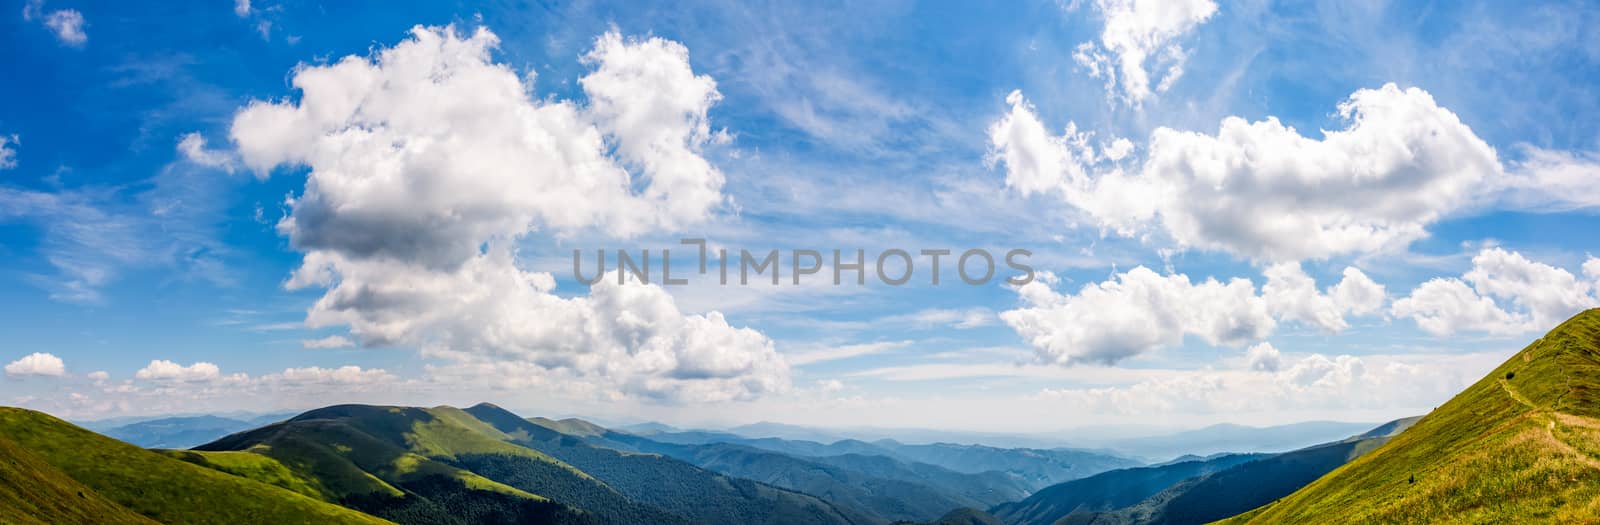 gorgeous cloudscape over the mountain ridge tops by Pellinni